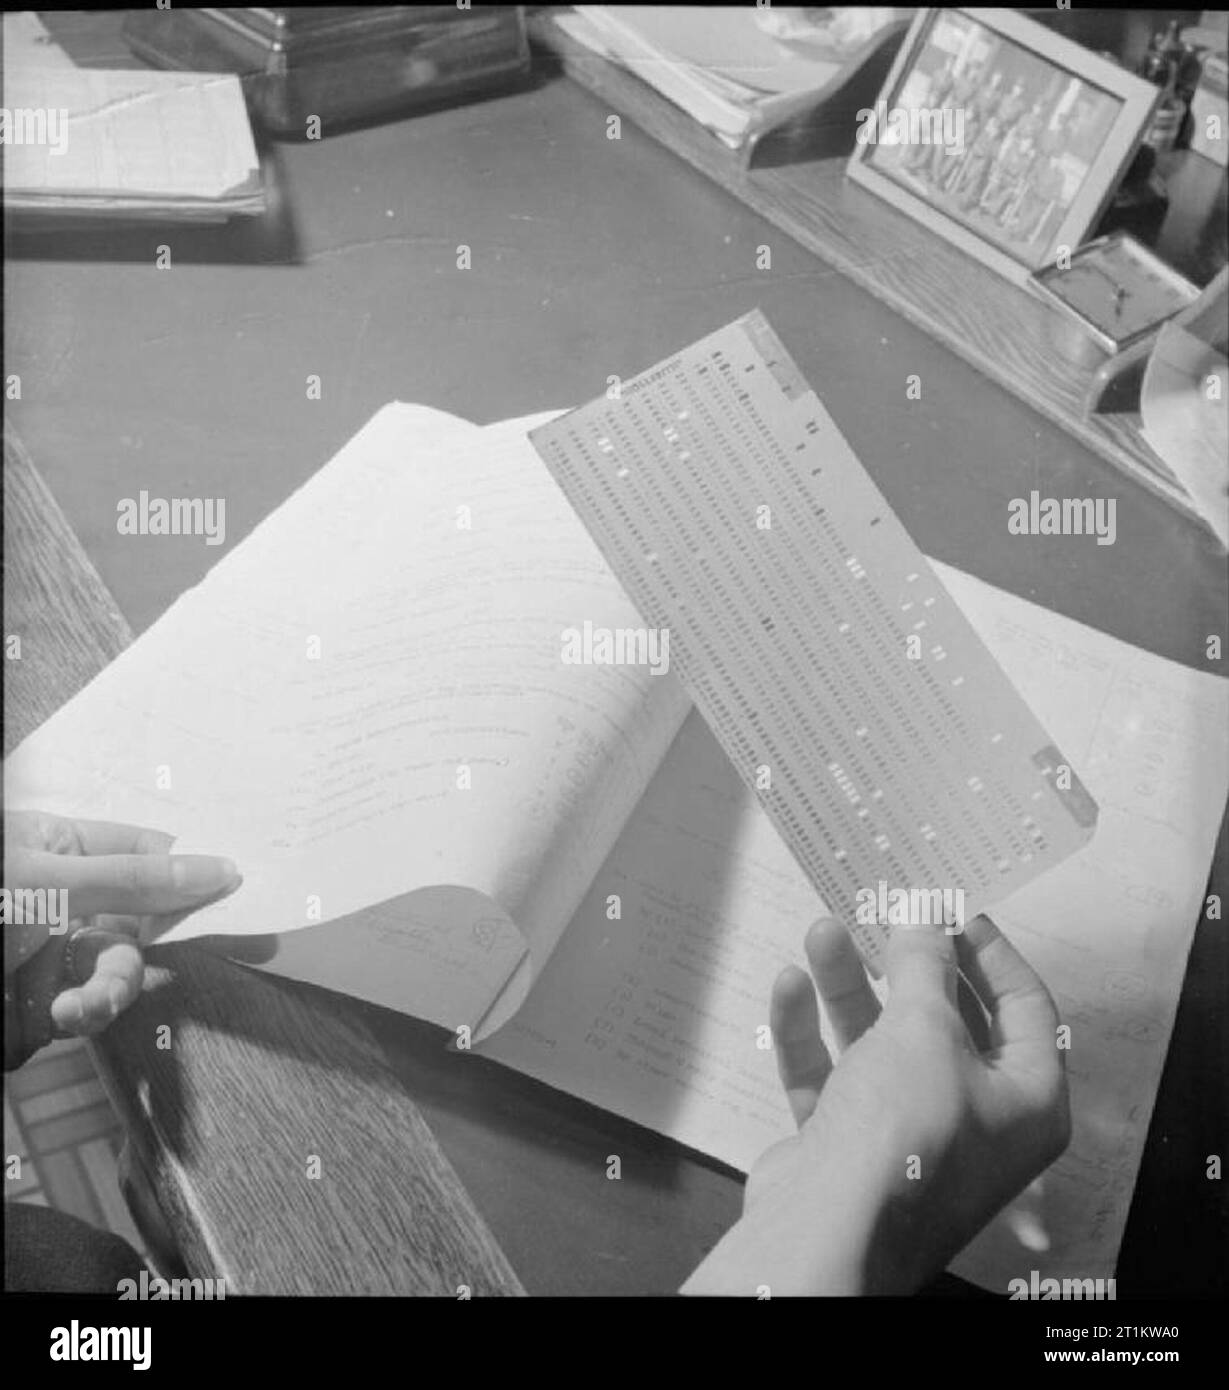 Wartime Social Survey- Information Gathering in Wartime Britain, UK, 1944 The information which has been gathered by interviewers arrives at the Wartime Social Survey as a series of ringed answers to questions on questionnaires. These answers are given code numbers which are then transferred to punched cards, with each hole representing the code number for a particular answer. Stock Photo